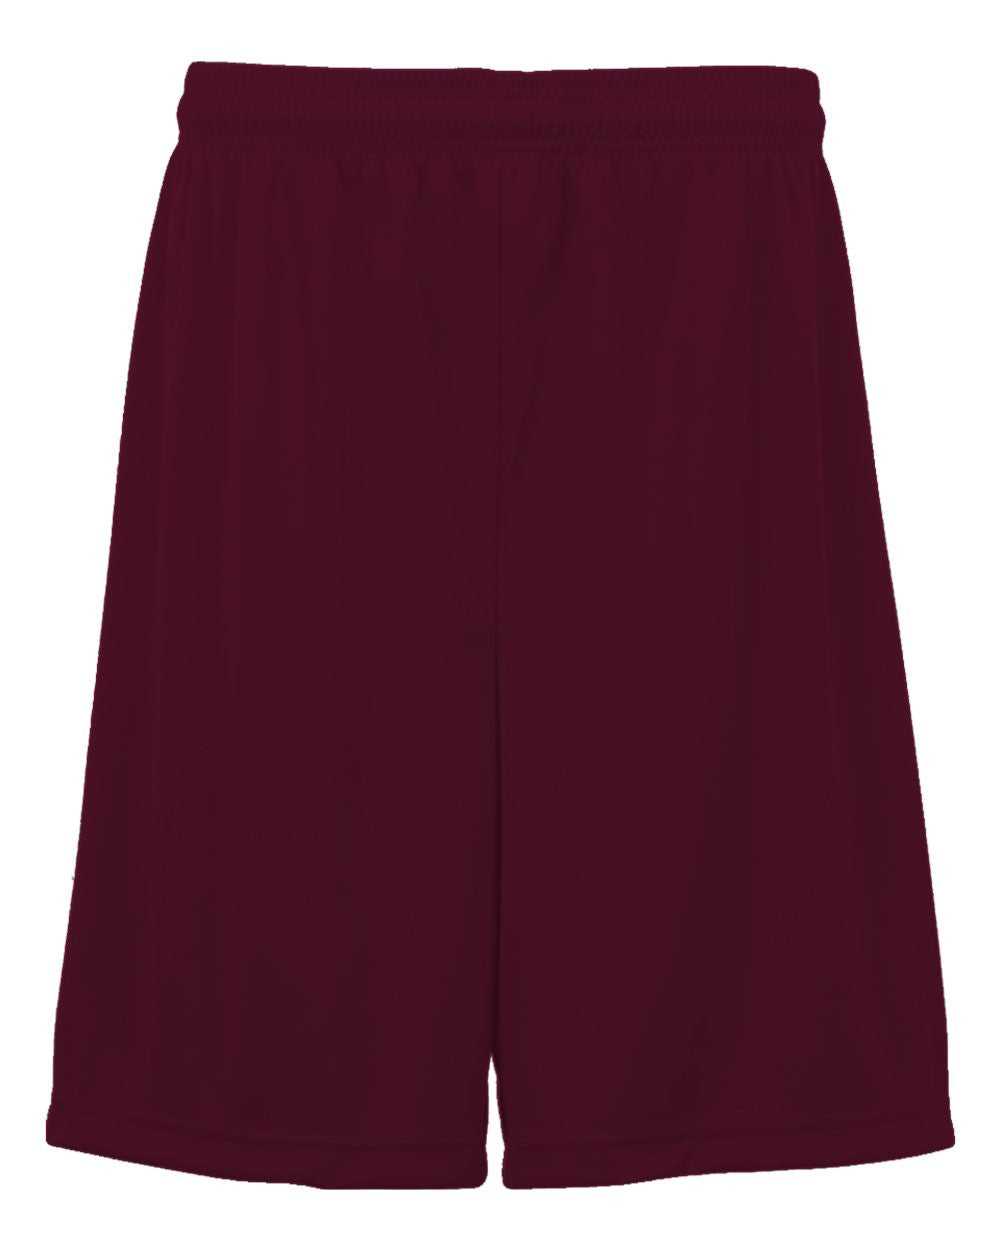 C2 Sport 5127 Performance 7" Short - Maroon - HIT a Double - 1